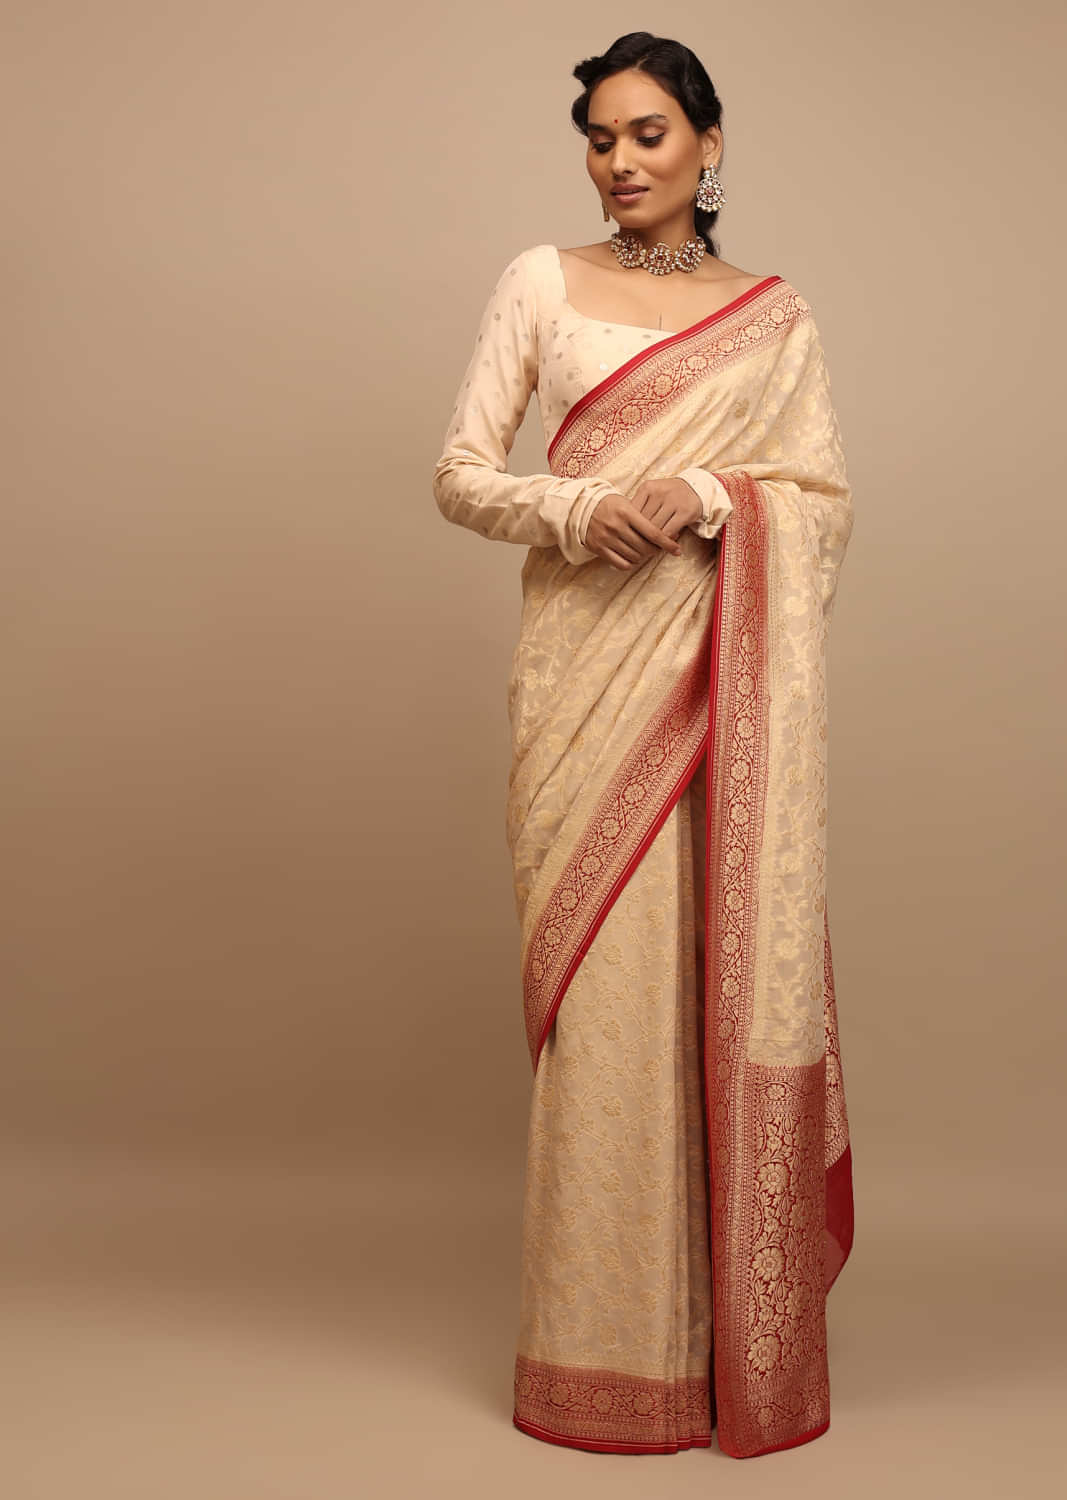 Off White Saree In Georgette With Contrasting Red Border And Woven Floral Jaal Work